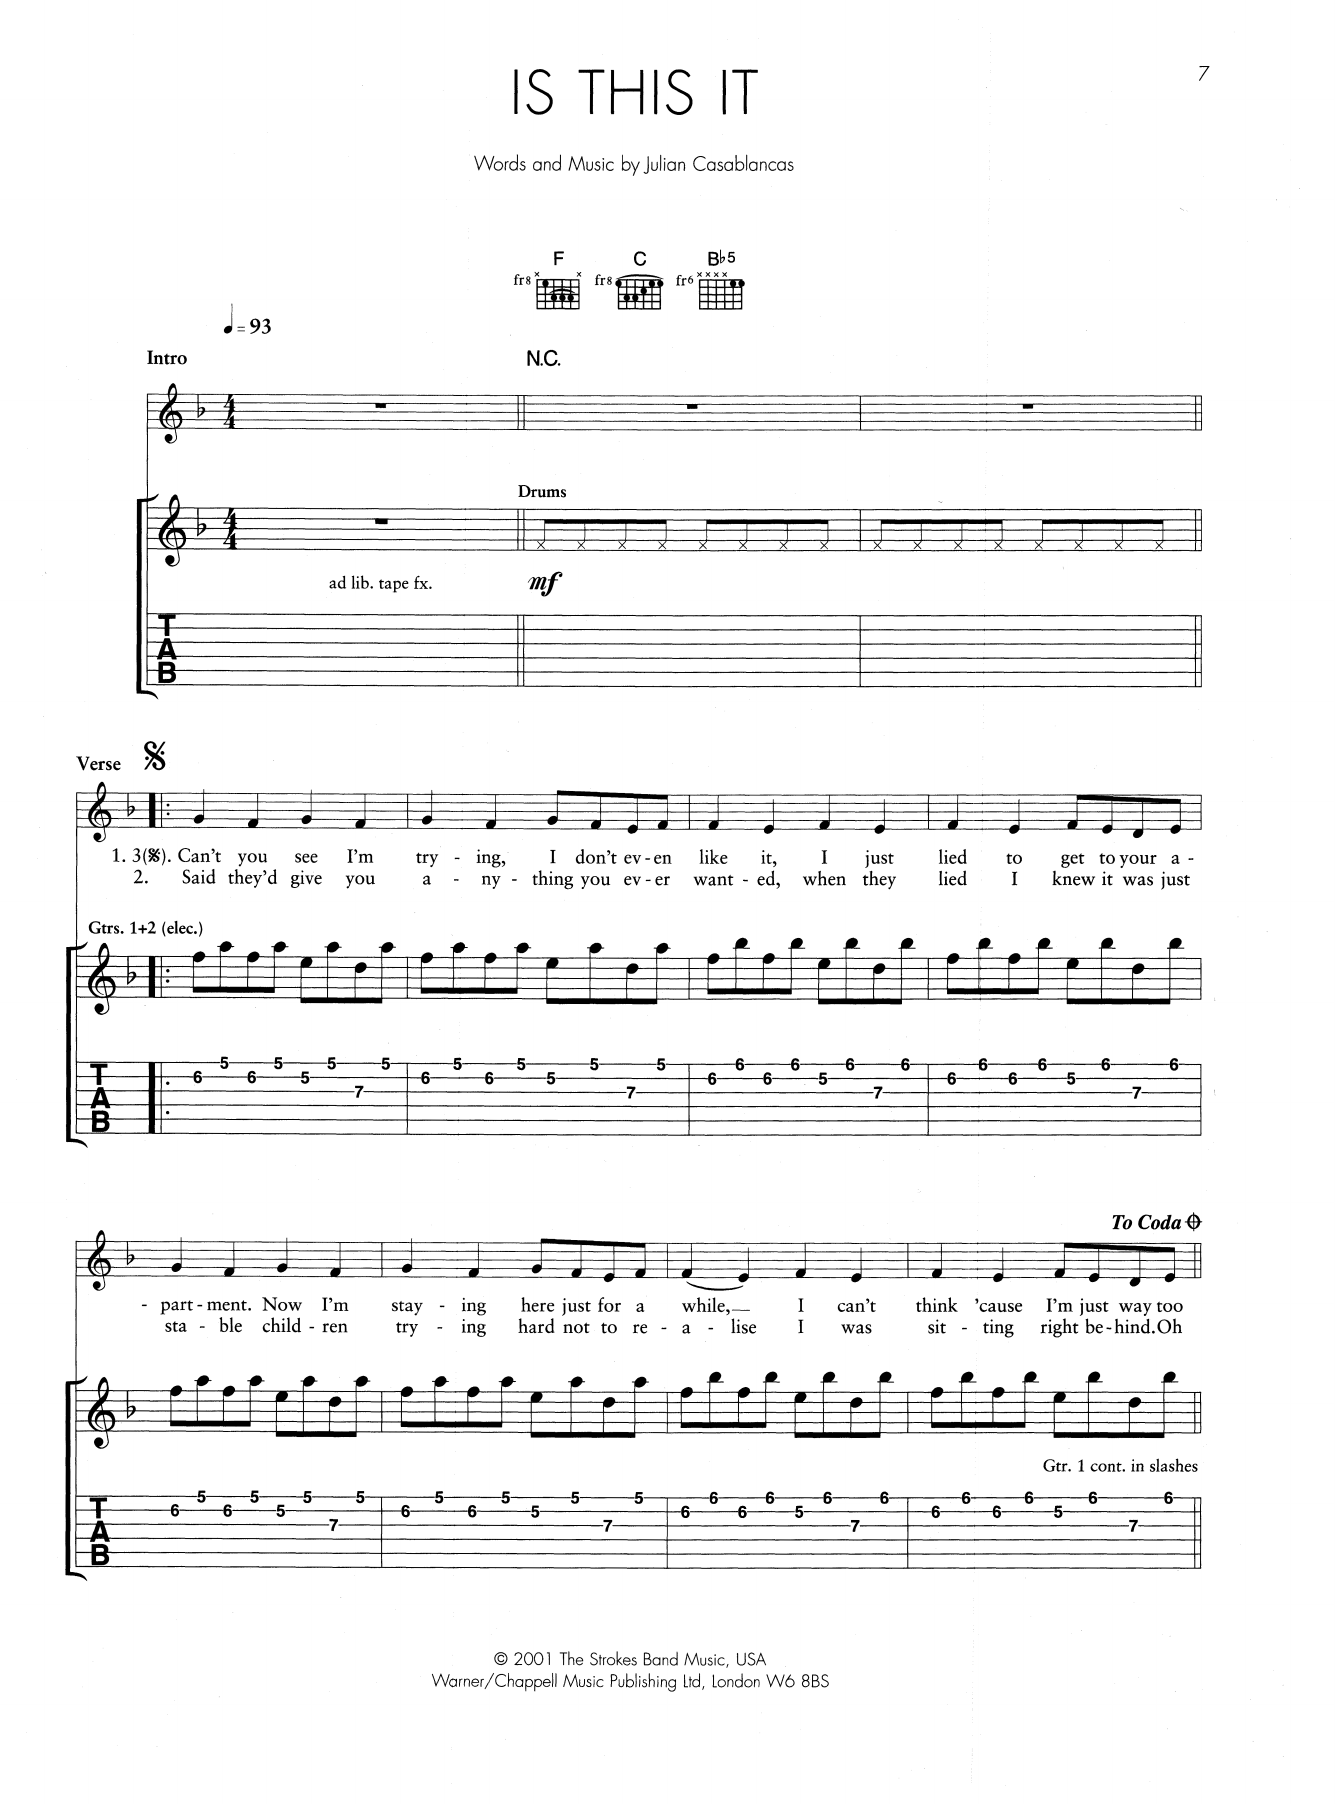 Download The Strokes Is This It Sheet Music